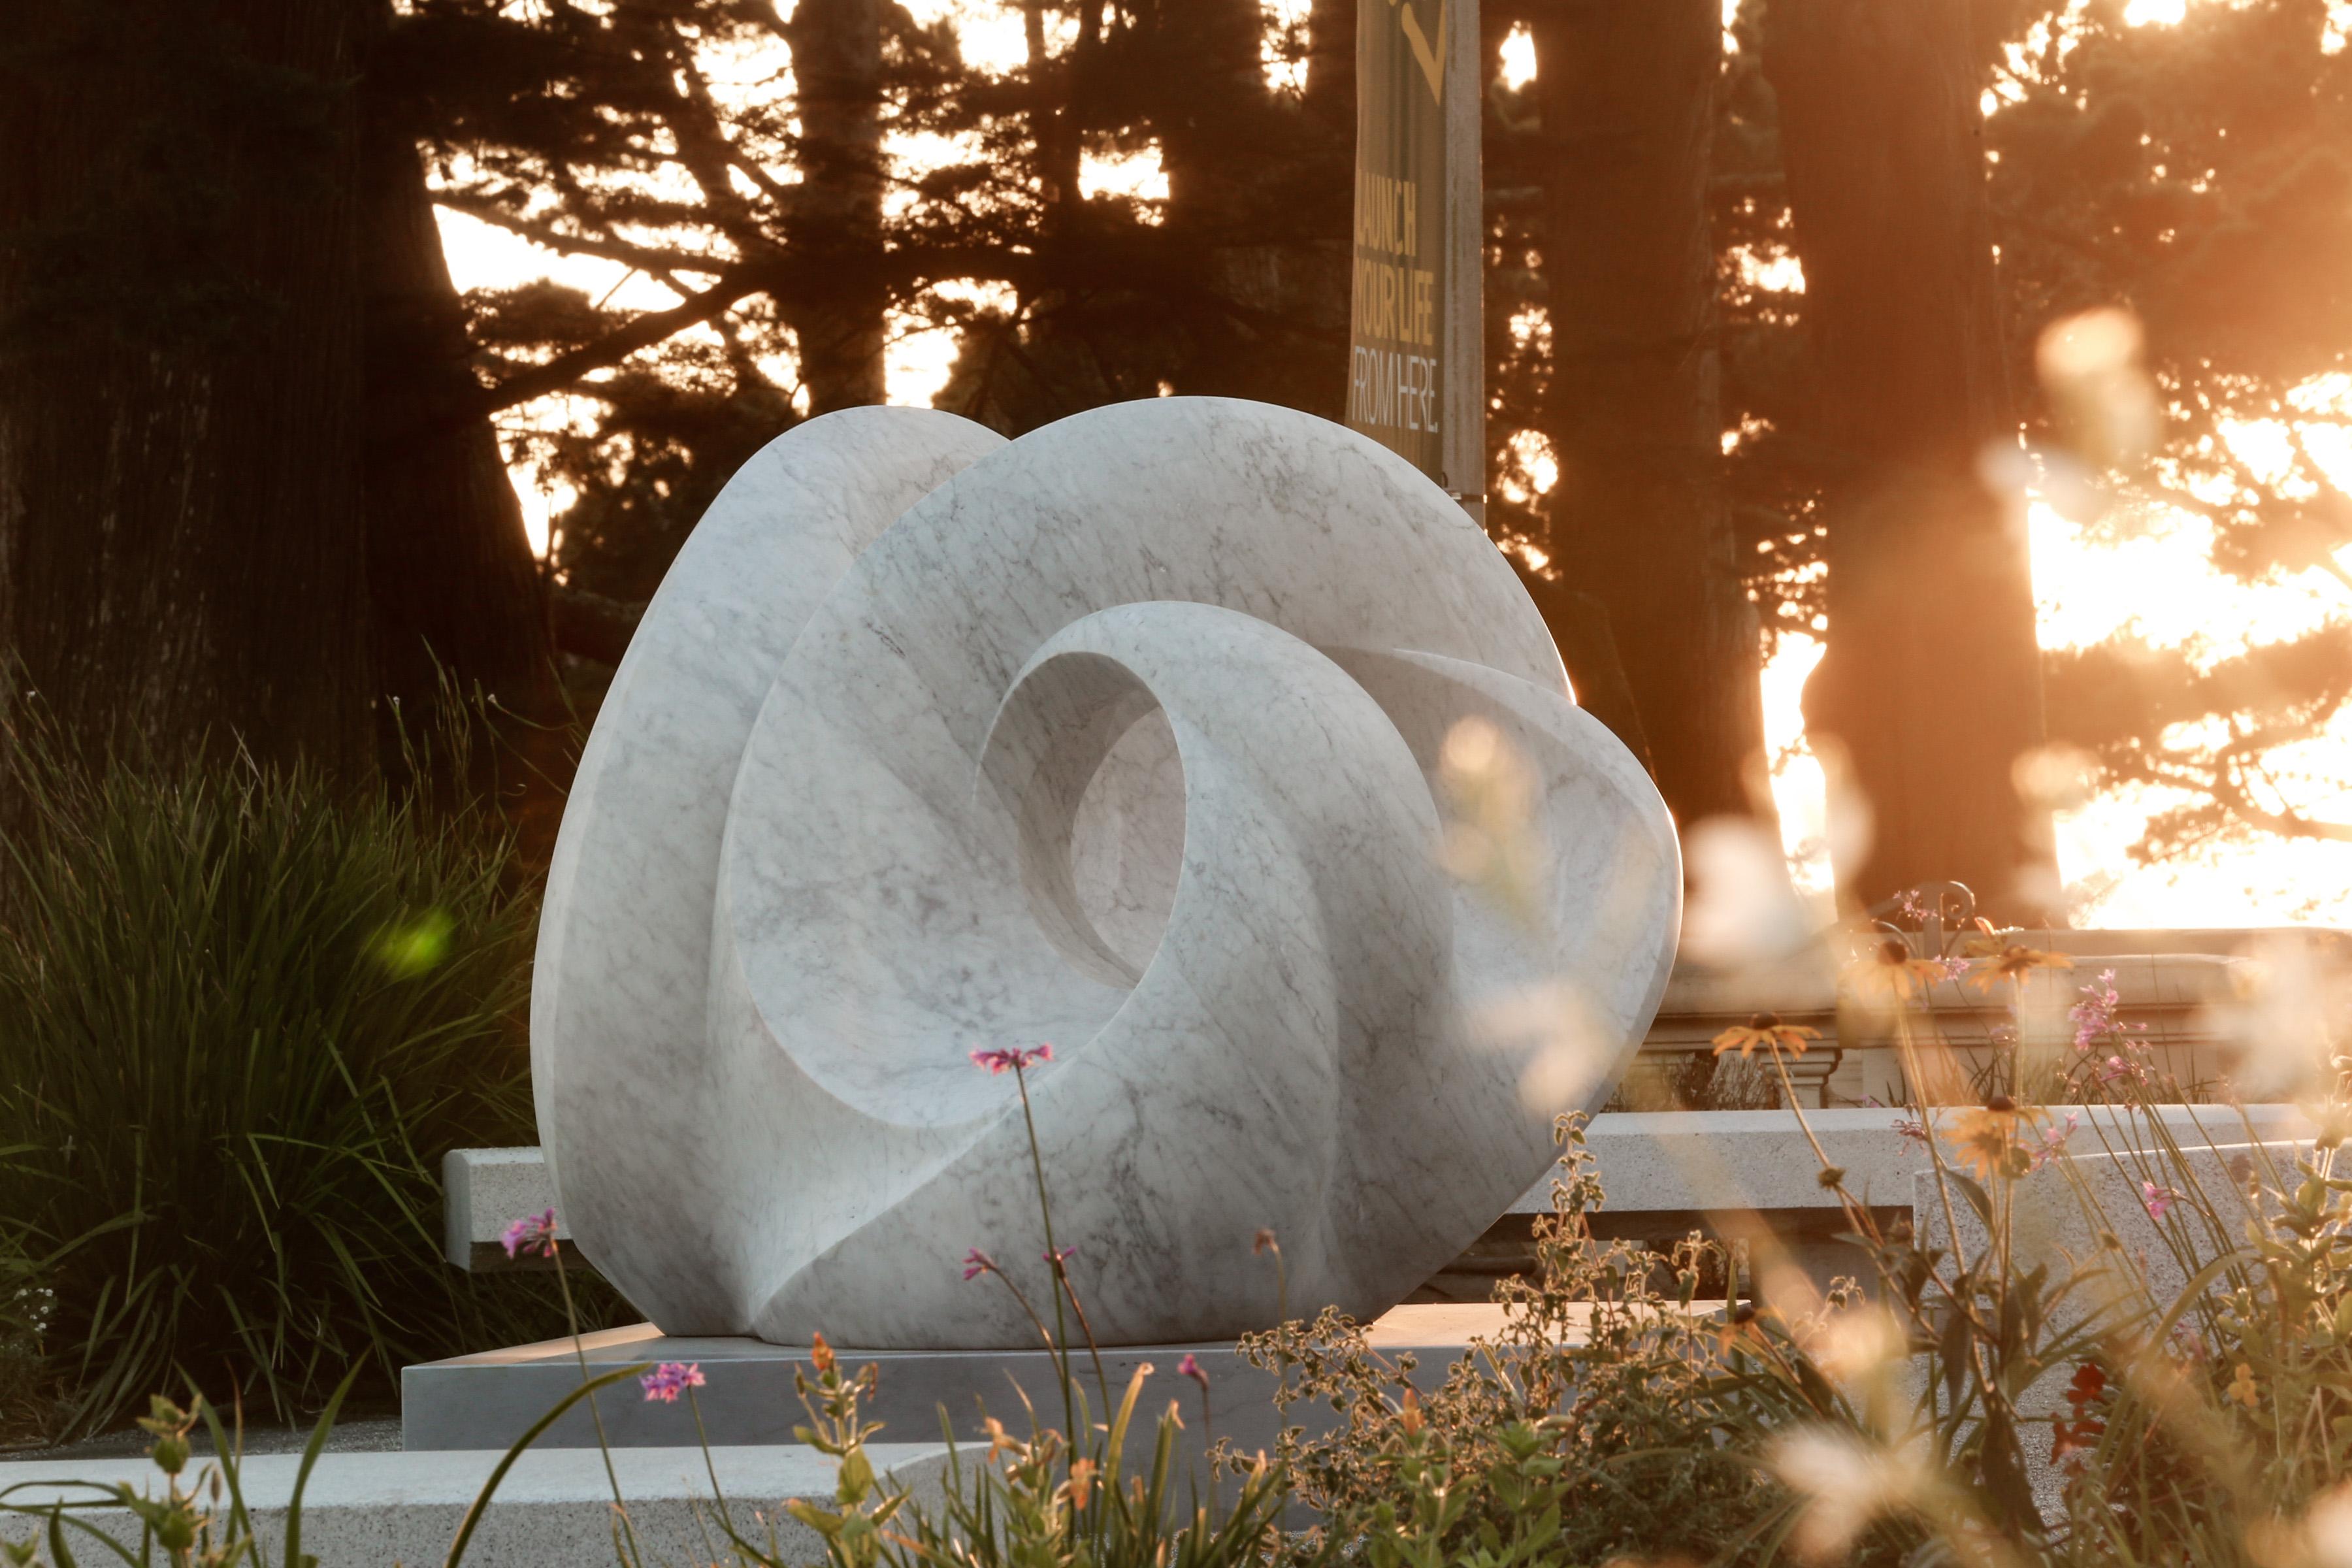 Tides by Yoko Kubrick is an abstract marble sculpture carved in Carrara marble from the Apuan Alps of Italy. The work explores the themes of time and water movement, symbolized by the German term 'der Gezeiten' which refers to the ebb and flow of